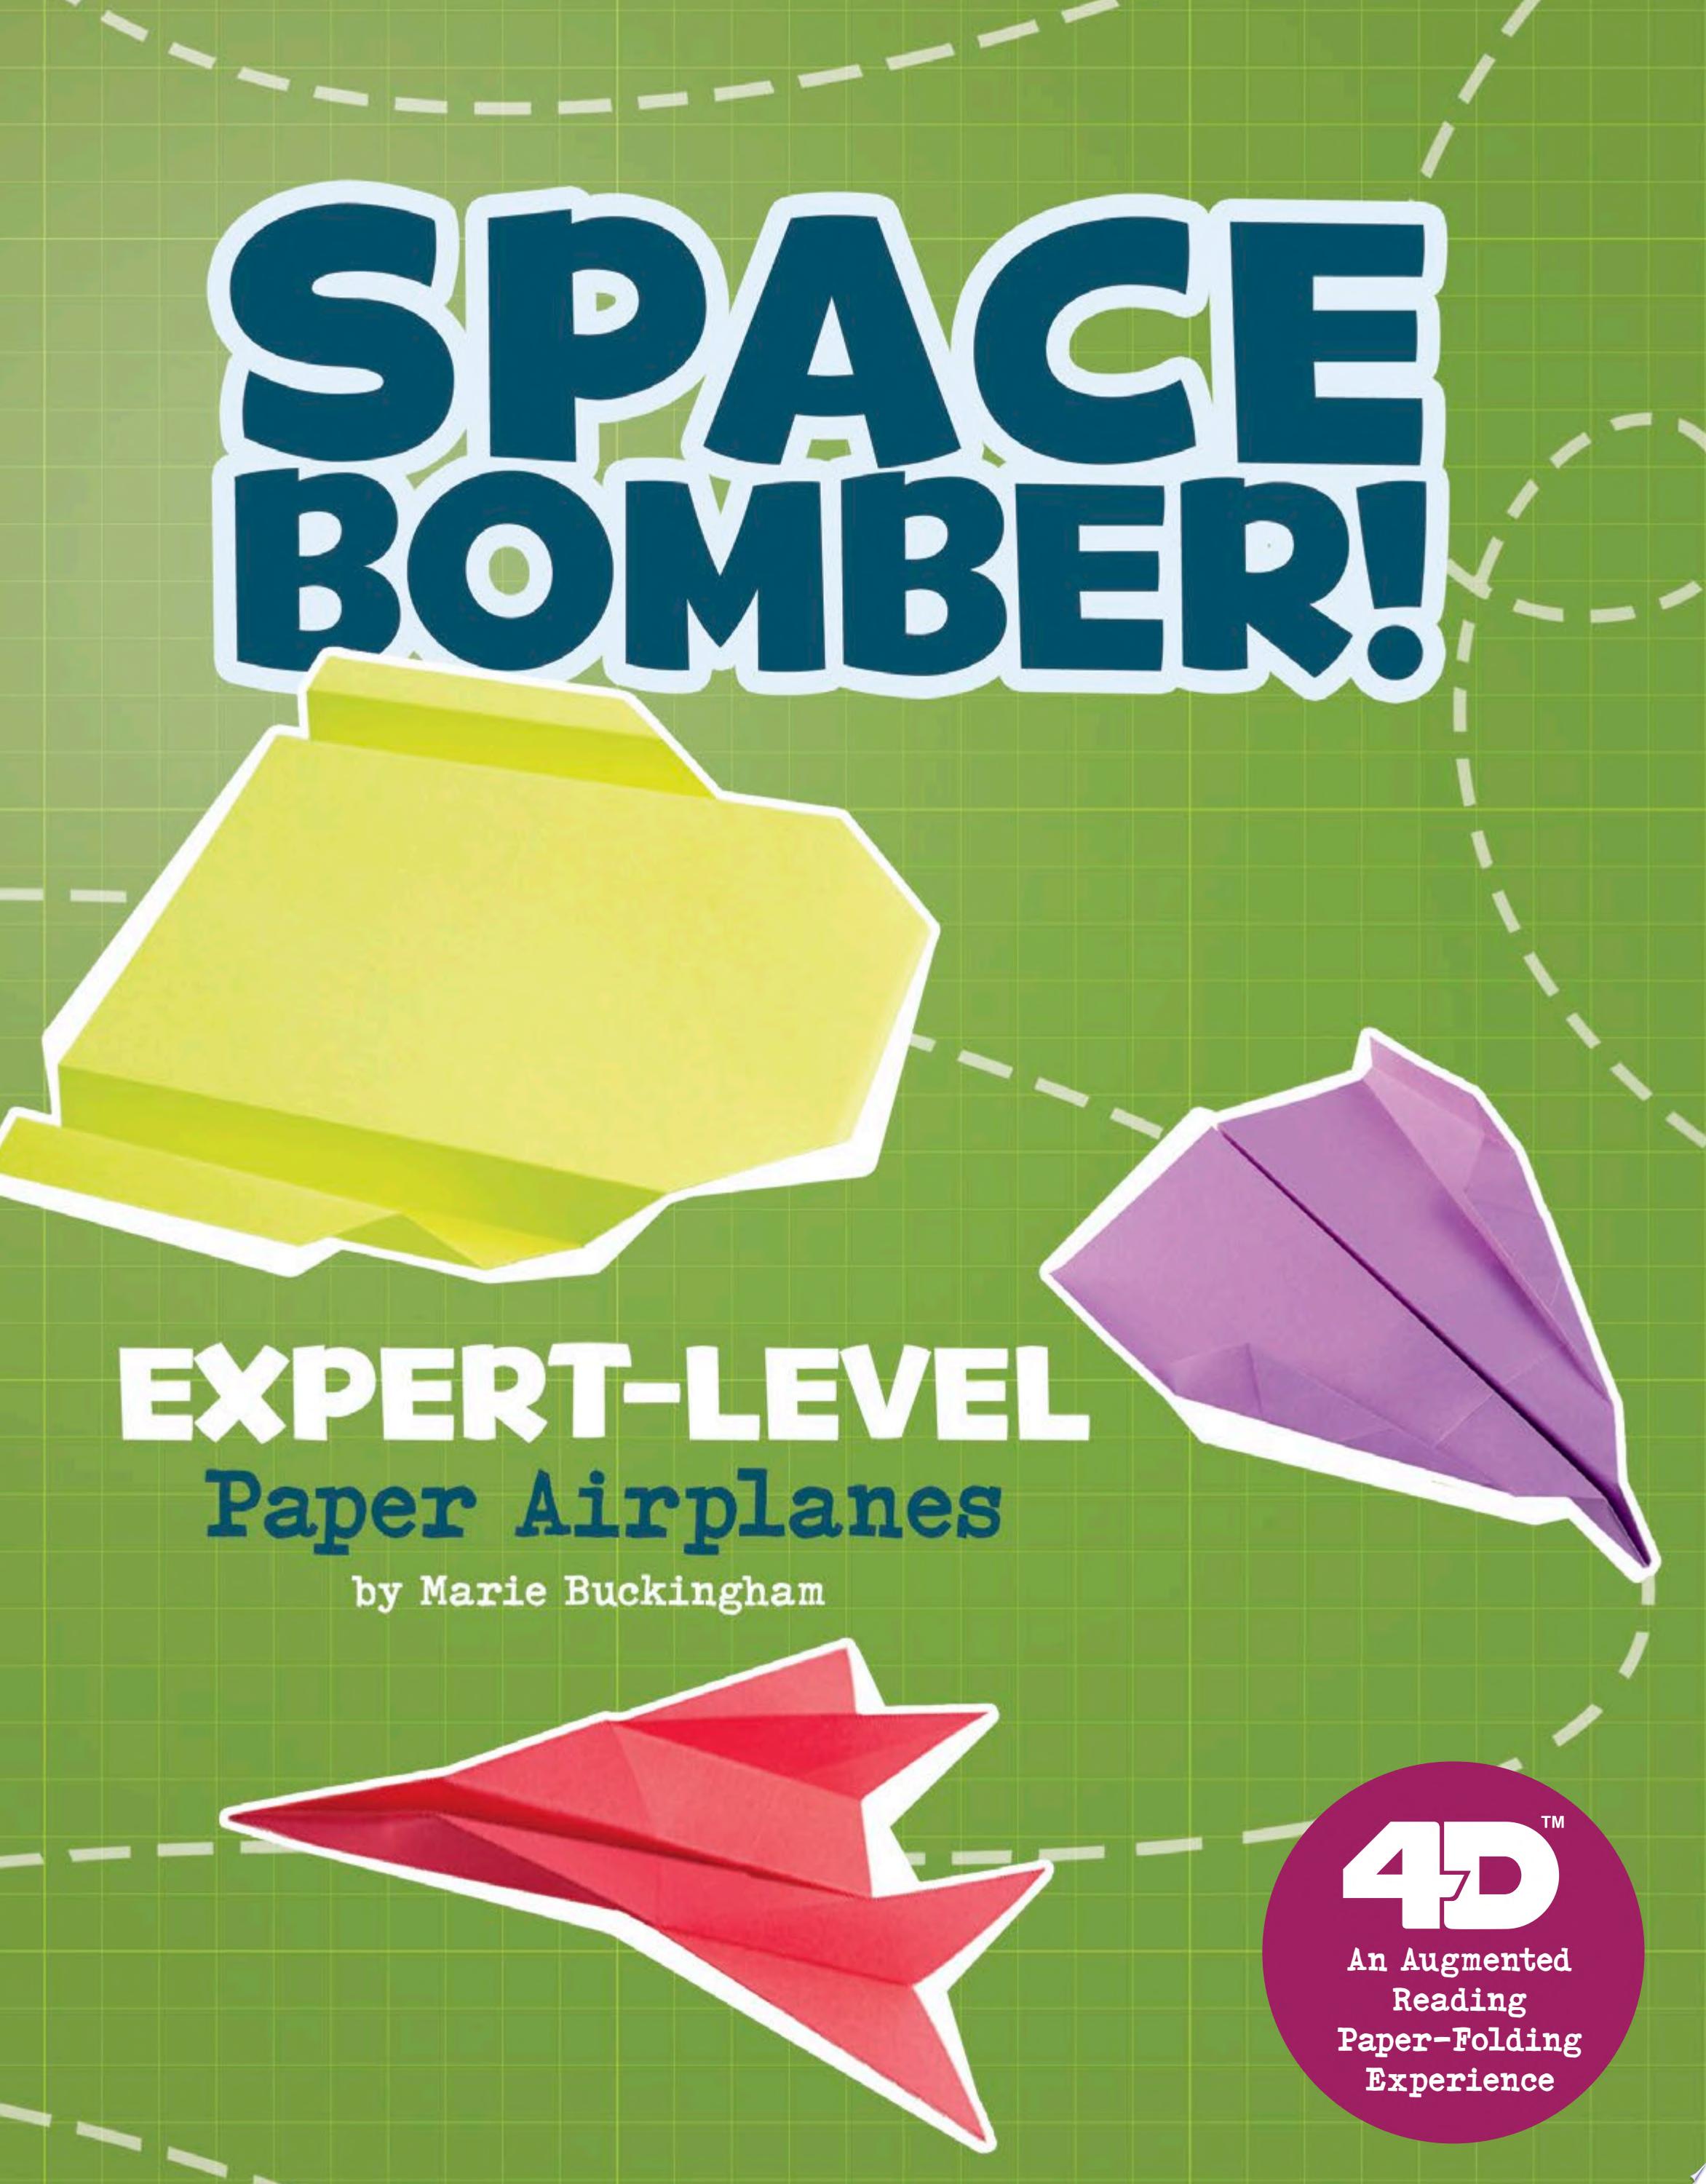 Image for "Space Bomber! Expert-Level Paper Airplanes: 4D an Augmented Reading Paper-Folding Experience"